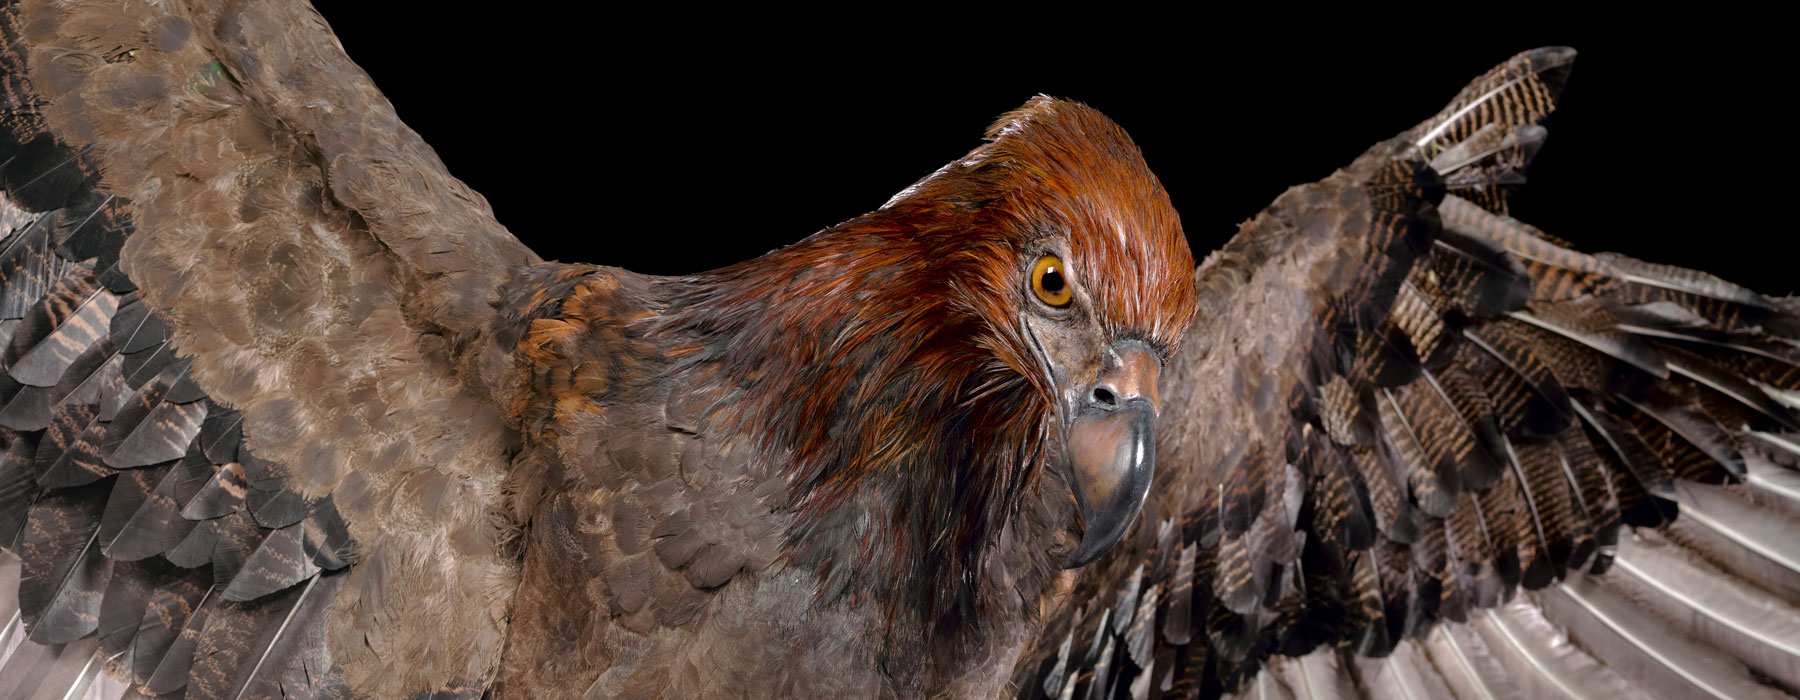 A model of the extinct Haast's eagle